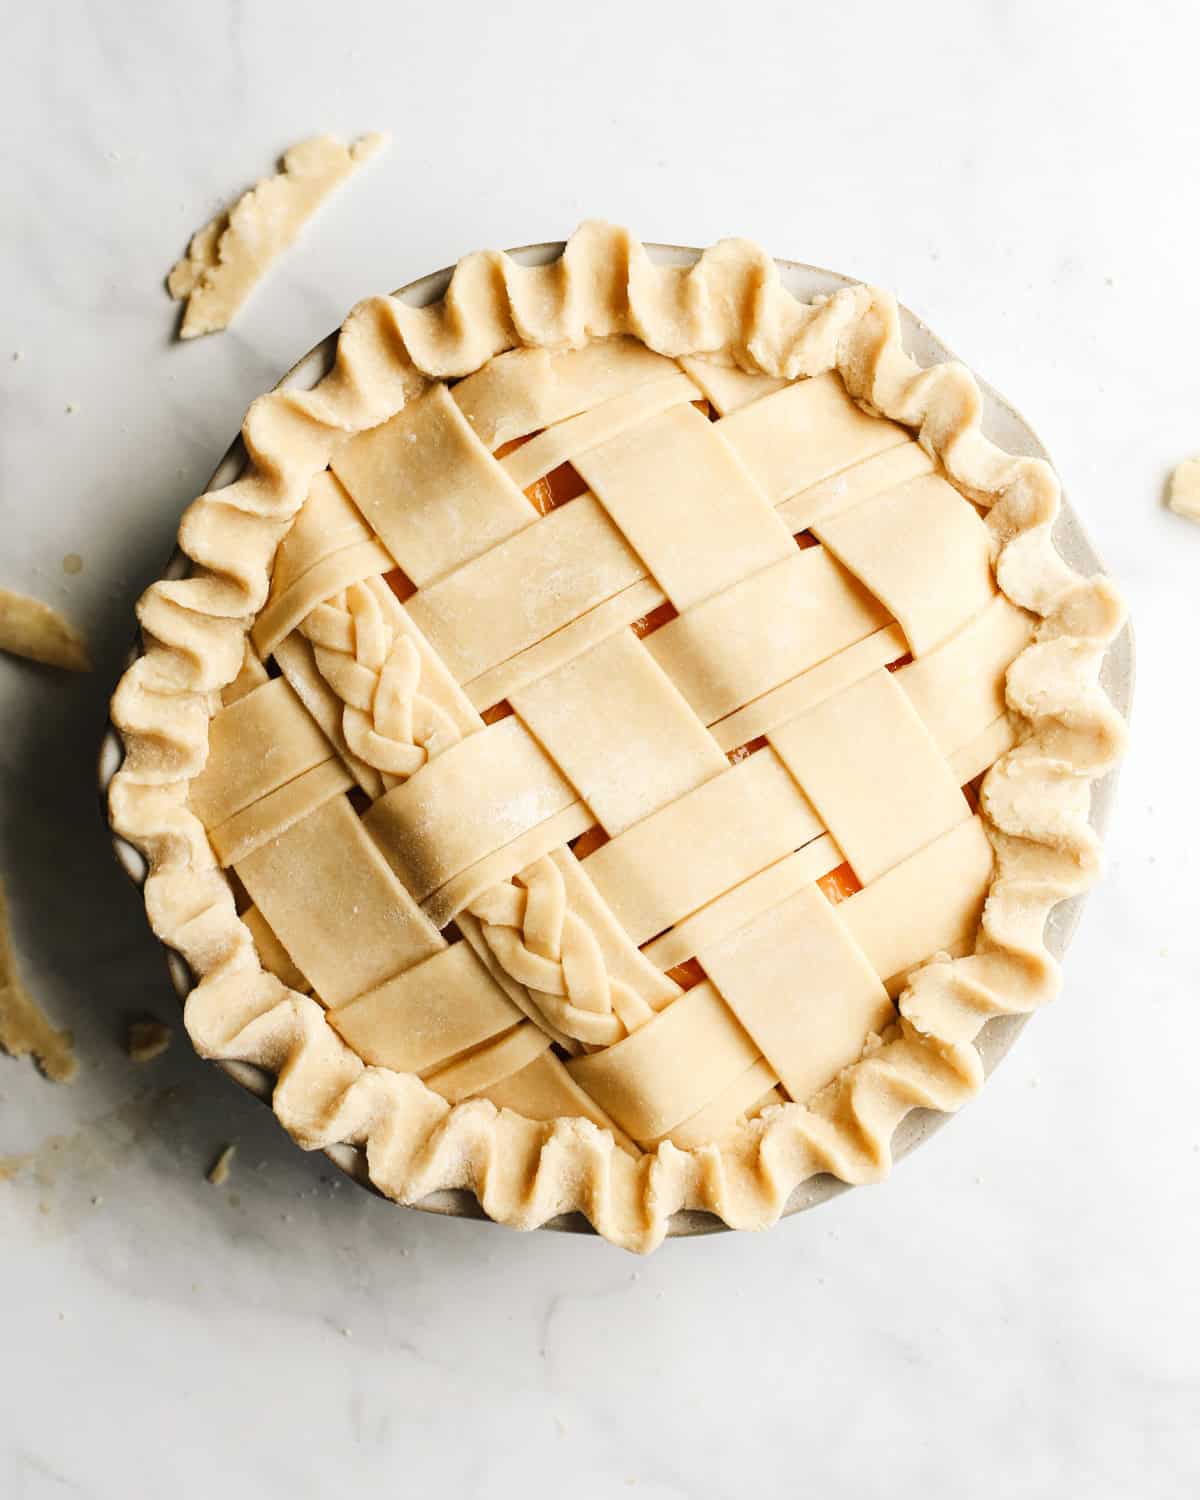 How to Make a Butter Pie Crust - assembled pie crust with lattice top and fluted edges